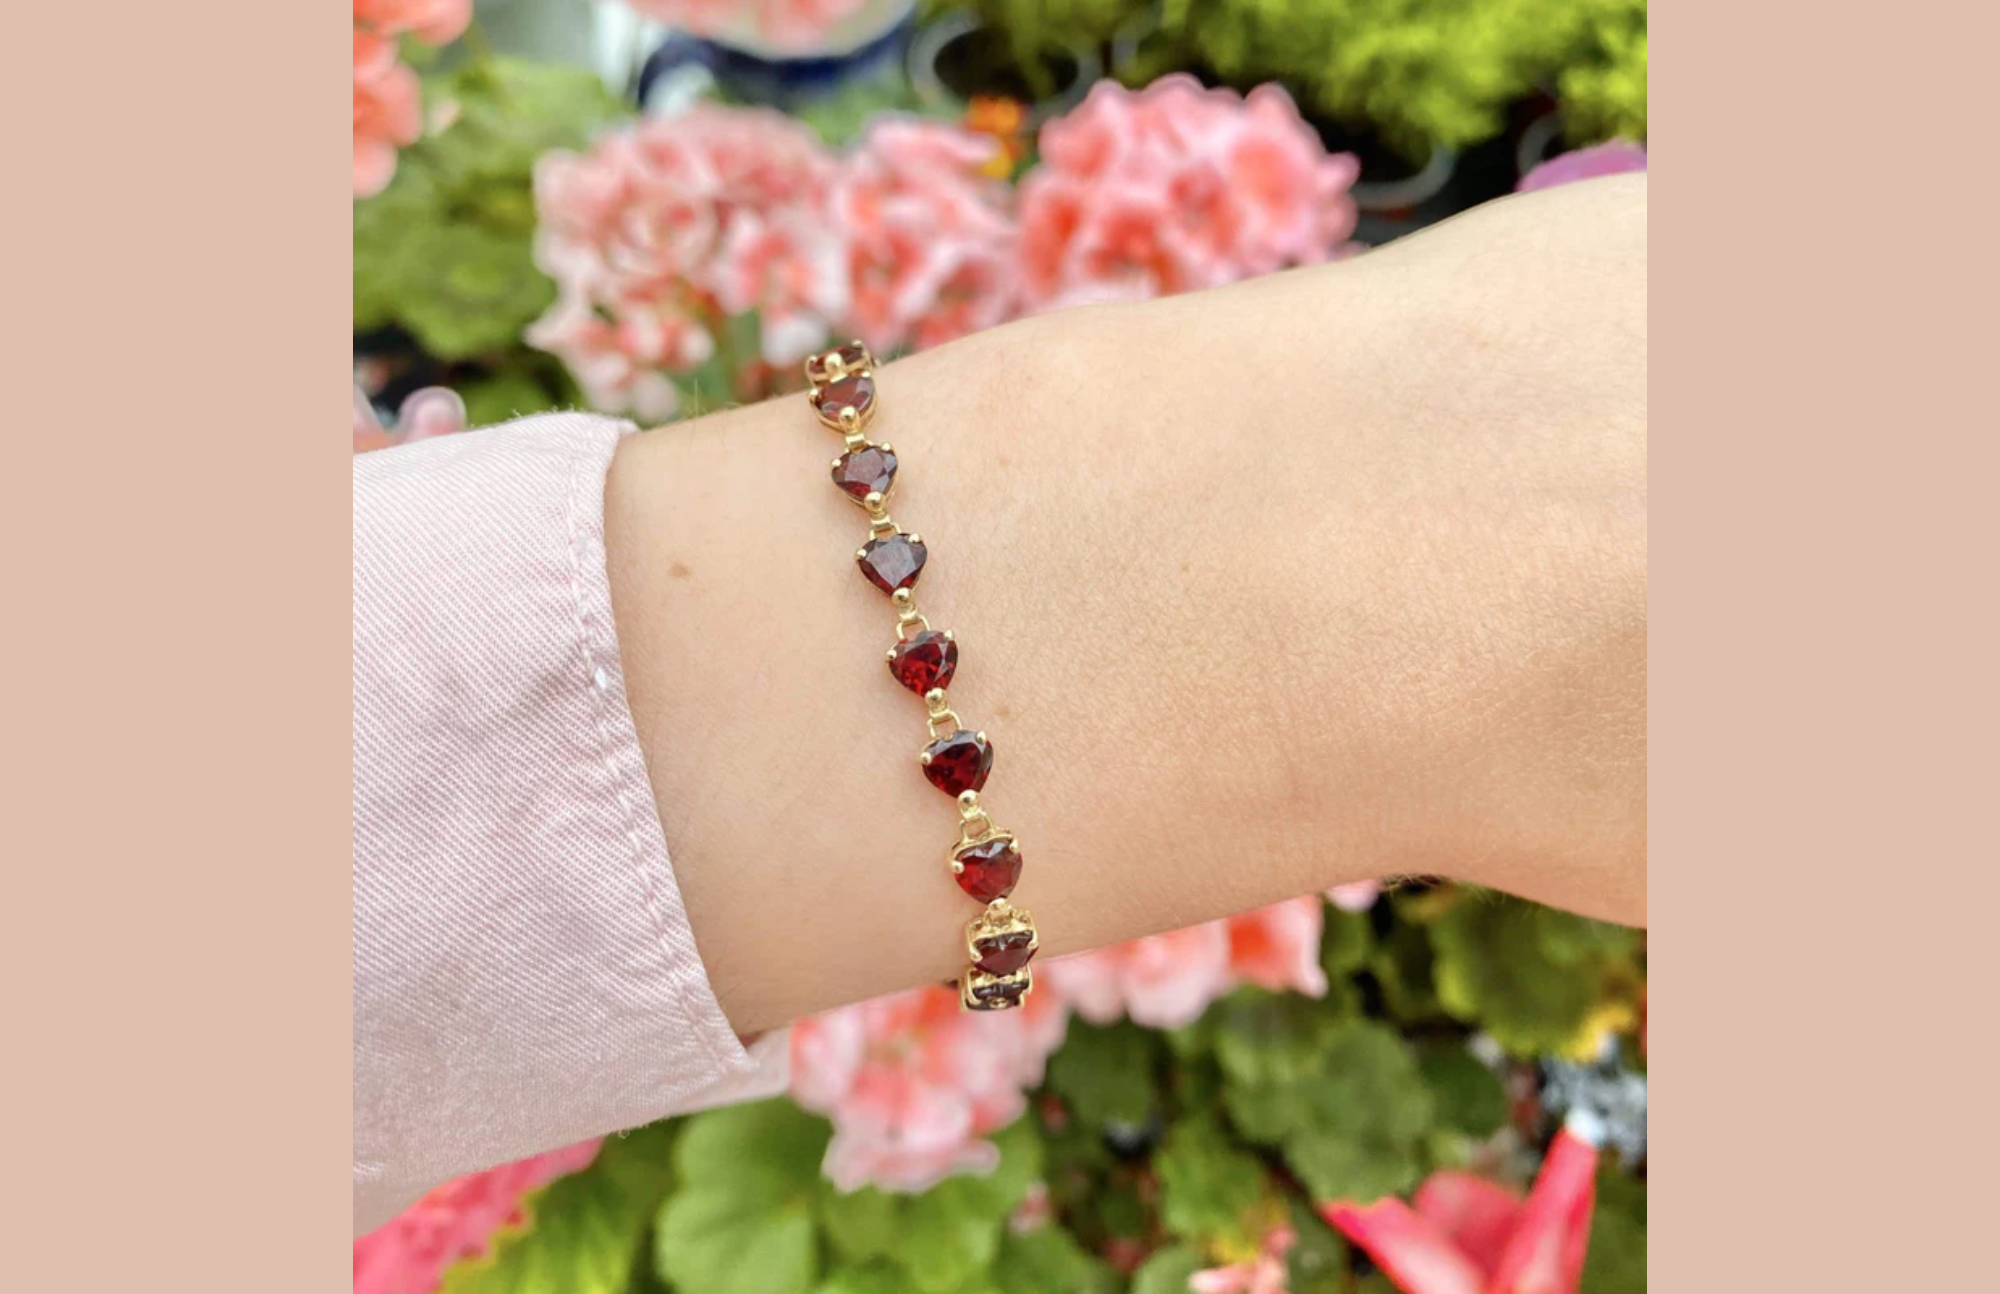 The bracelet is made up of heart-shaped Garnets placed in individual 9ct yellow gold settings